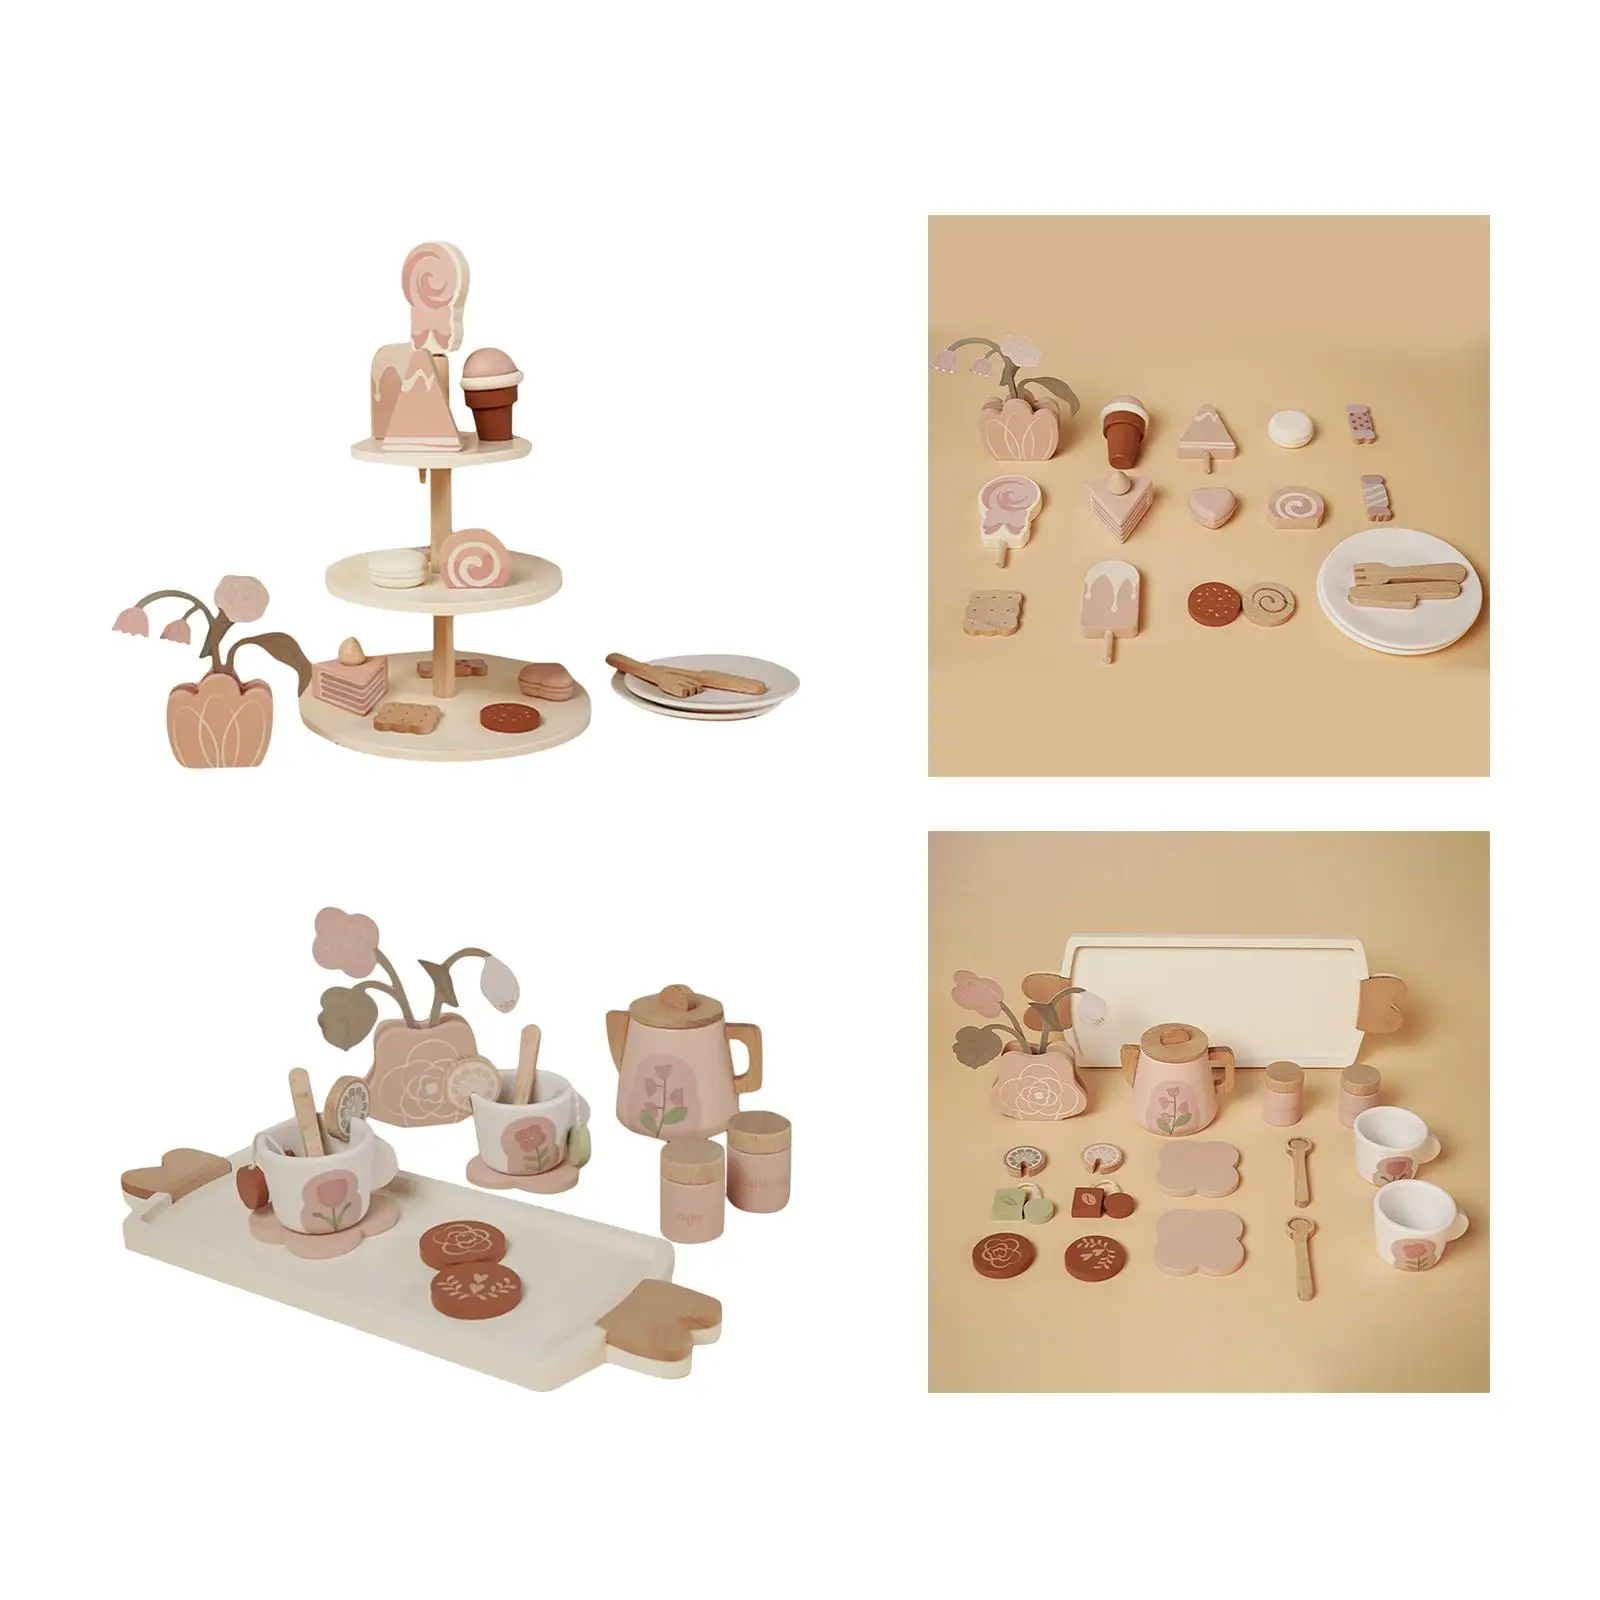 Wooden Afternoon Tea Set Toy Pretend Play Kitchen Toys Kitchen Accessories Dessert Playset Mini Toys Girls tea toy for Toddlers